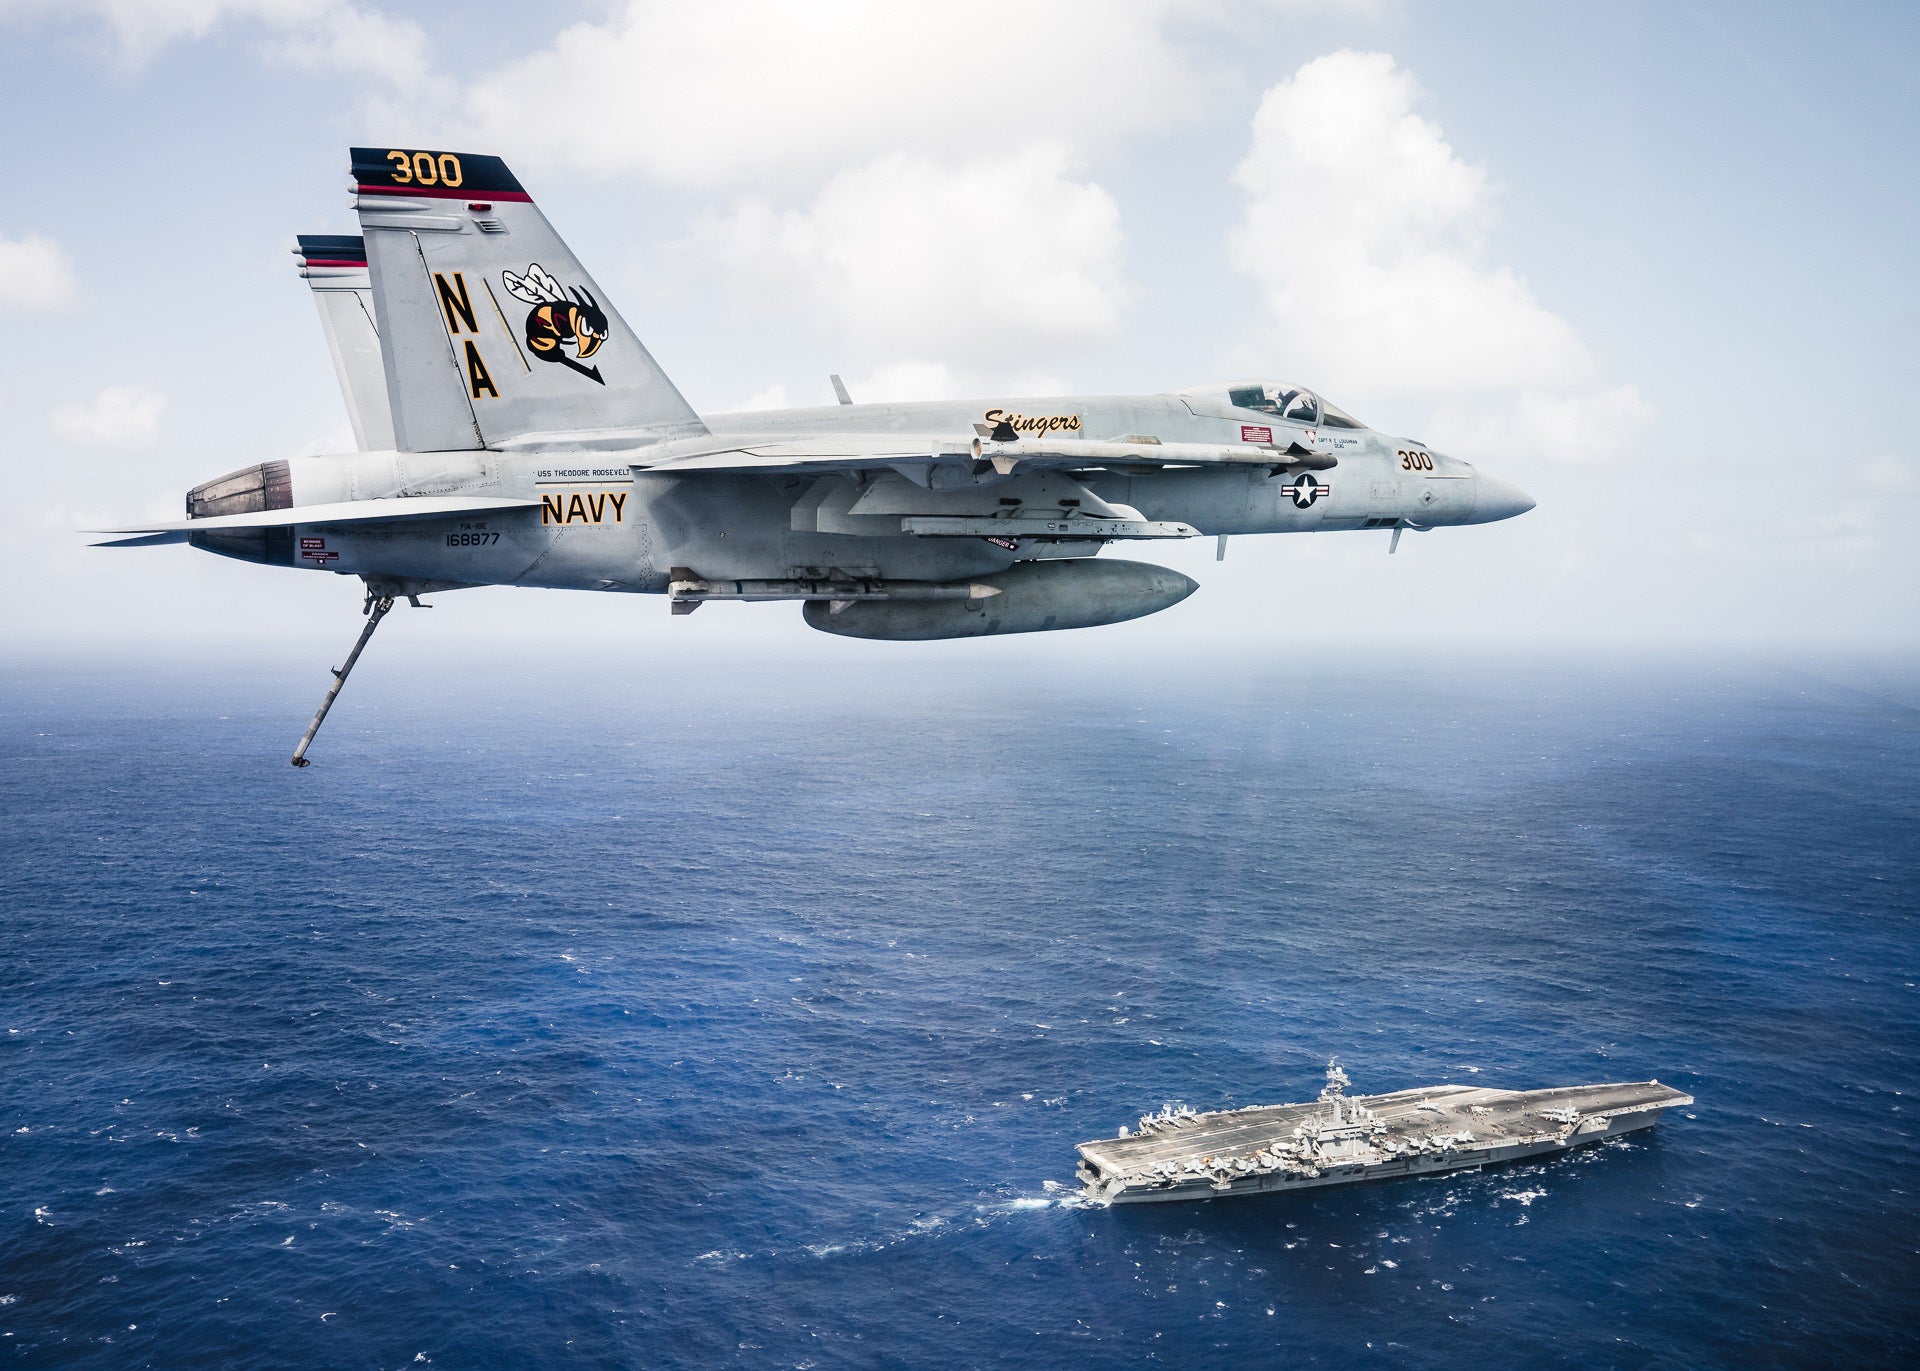 171026-N-TQ088-587 PACIFIC OCEAN (Oct. 26, 2017) An F/A-18E Super Hornet, assigned to the Stingers of Strike Fighter Attack Squadron (VFA) 113 flies over the aircraft carrier USS Theodore Roosevelt (CVN 71). The ship is underway for a regularly scheduled deployment in the U.S. 7th Fleet area of operations in support of maritime security operations and theater security cooperation efforts. (U.S. Navy photo by Lt. Aaron B. Hicks/Released)